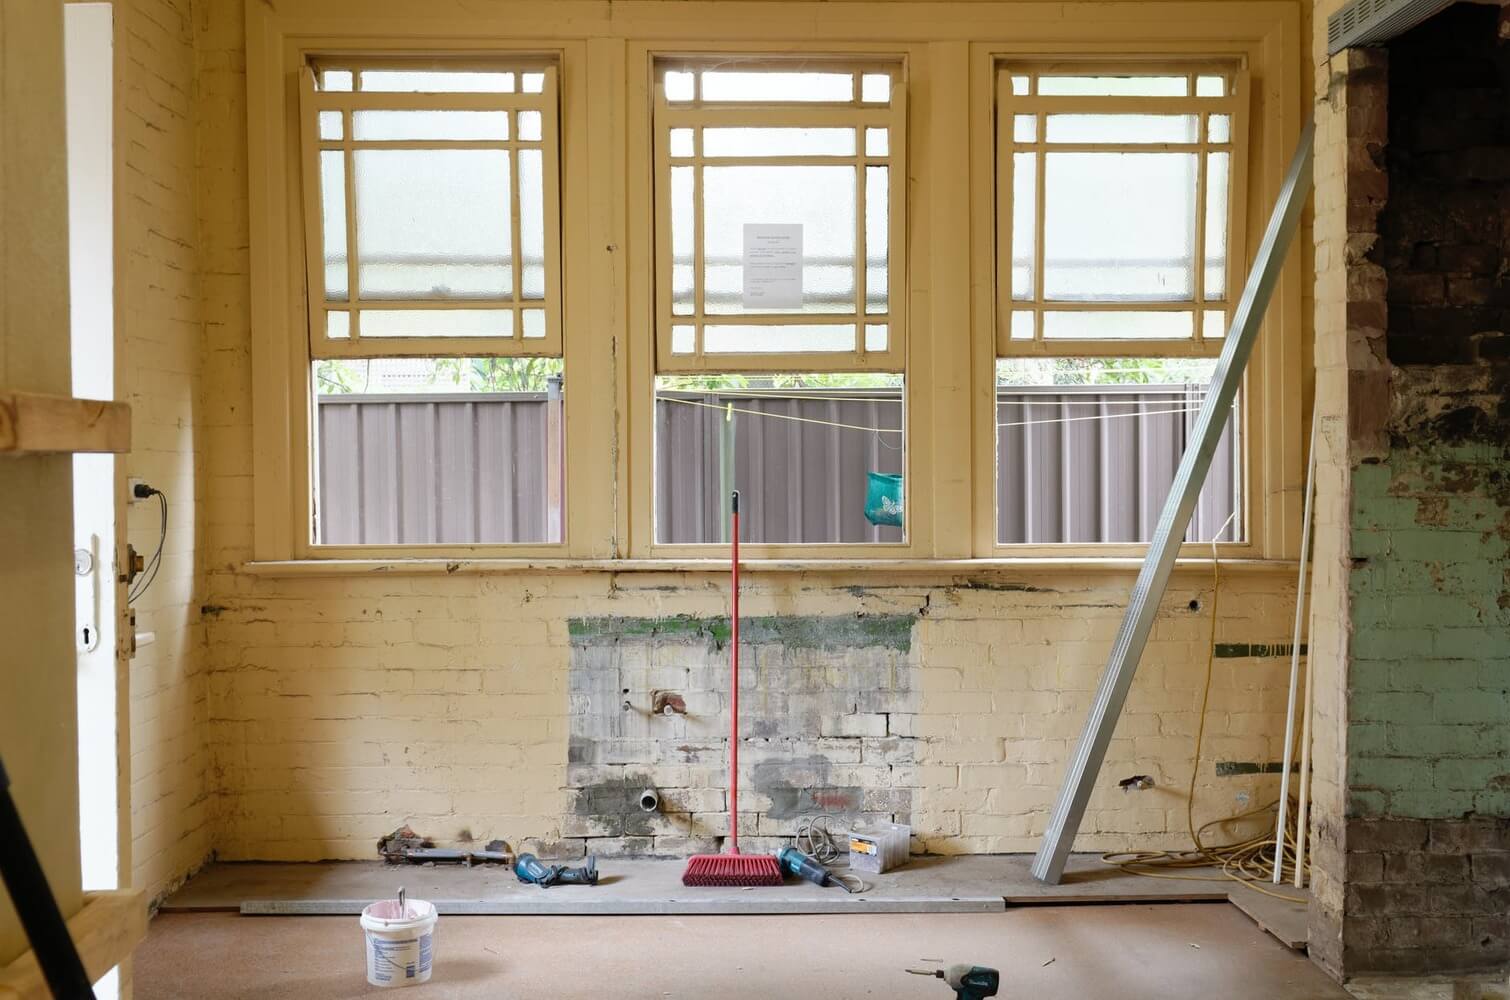 9 Ways to Save Money on Your Next Home Renovation Project